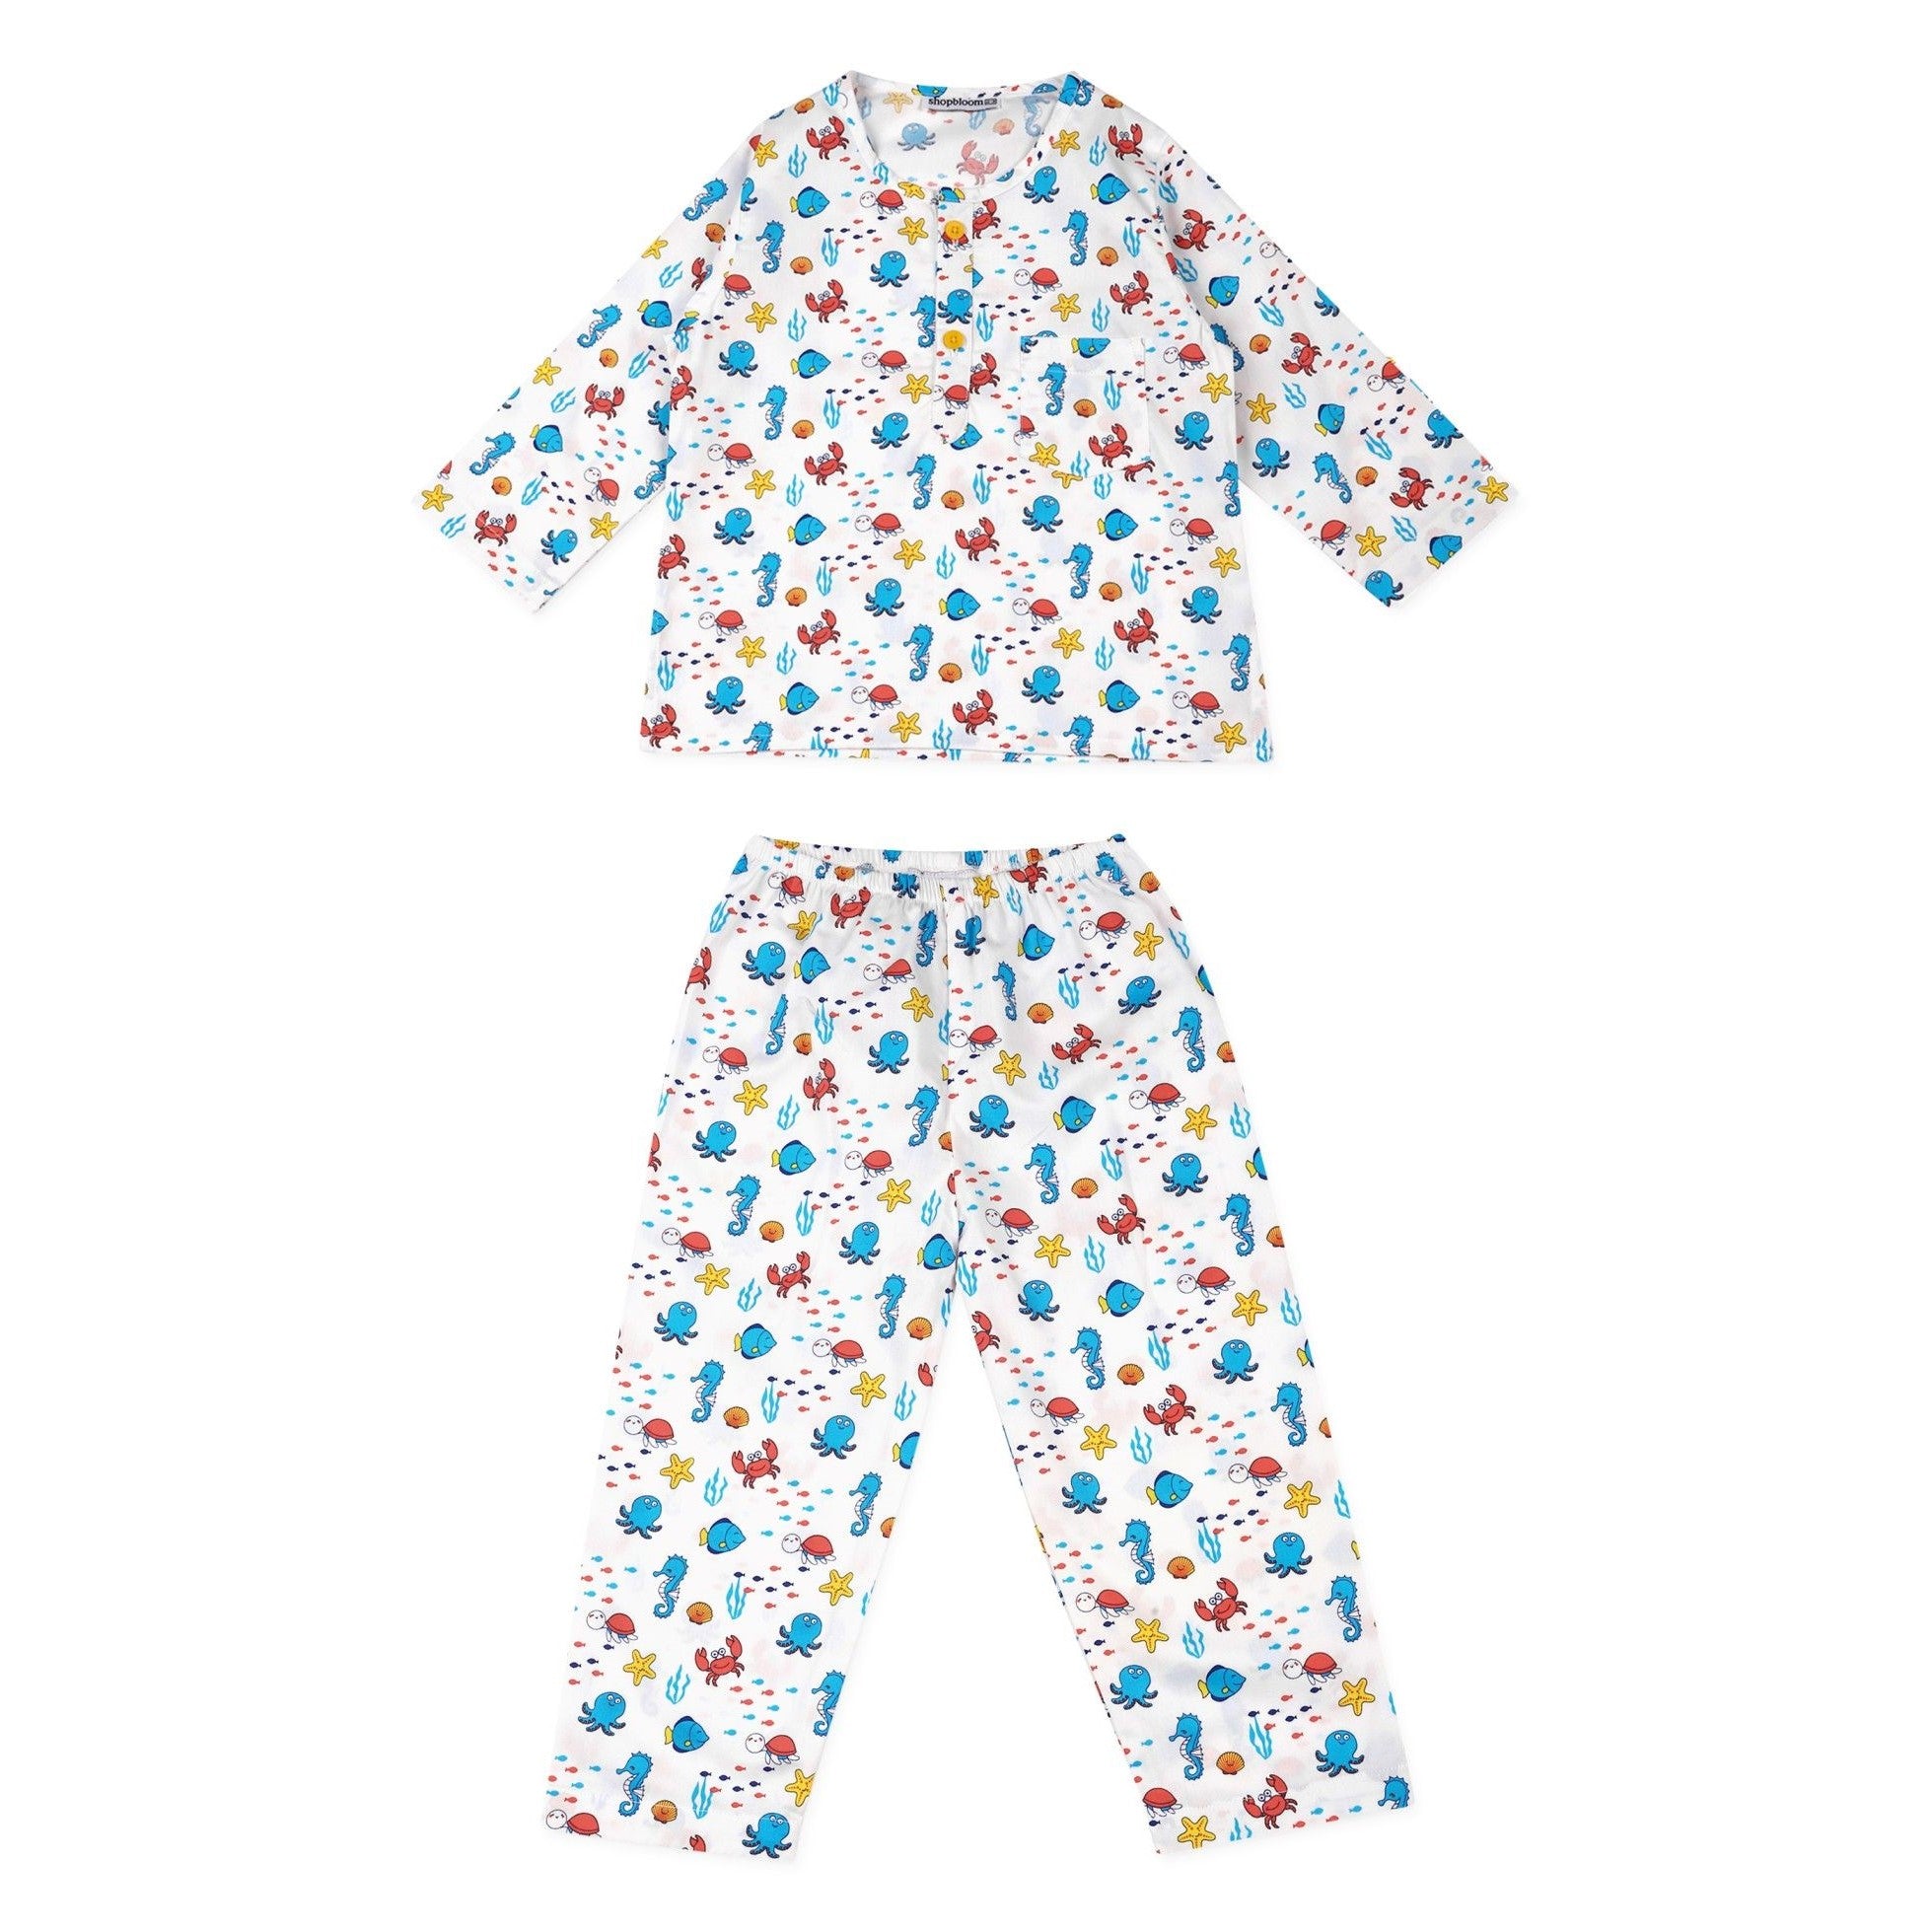 Under The Sea Print Long Sleeve Kids Round Neck Night Suit